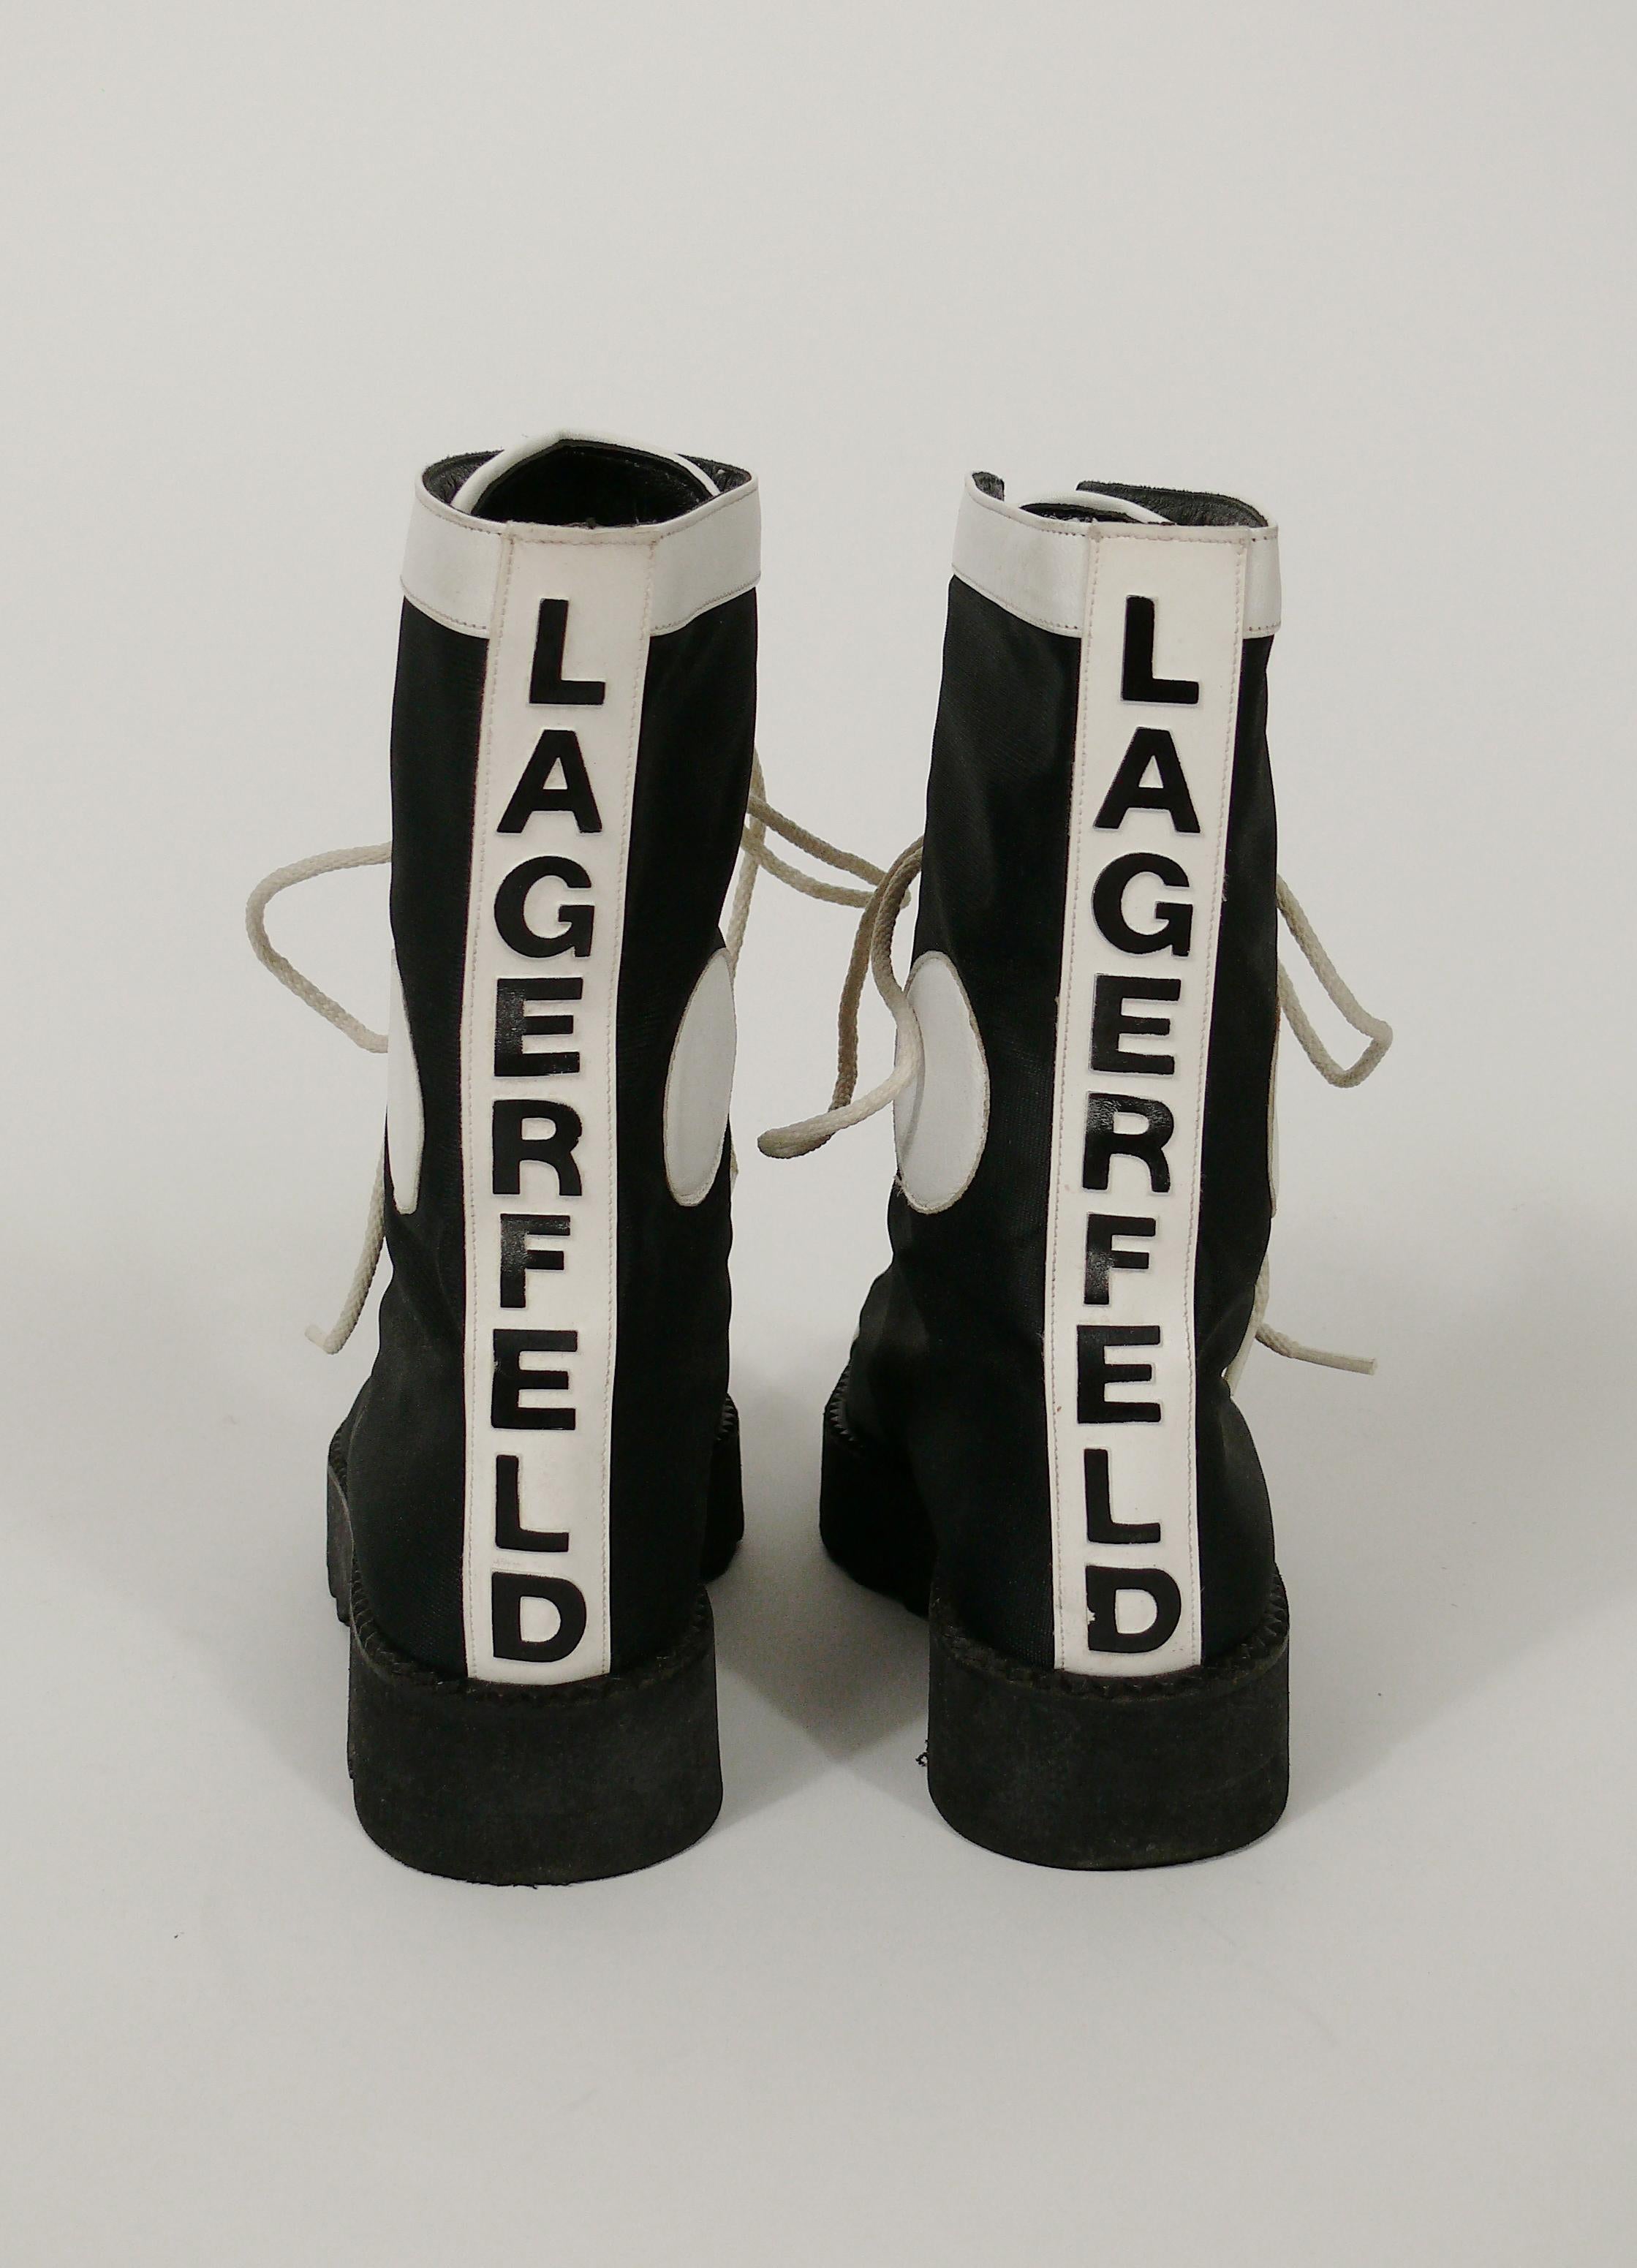 KARL LAGERFELD vintage rare 1990s black and white lace up combat boots.

These boots feature :
- Lightweight black synthetic material body with white leather details.
- Lace up front.
- Platform soles.
- Black LAGERFELD lettering signature.
- Black